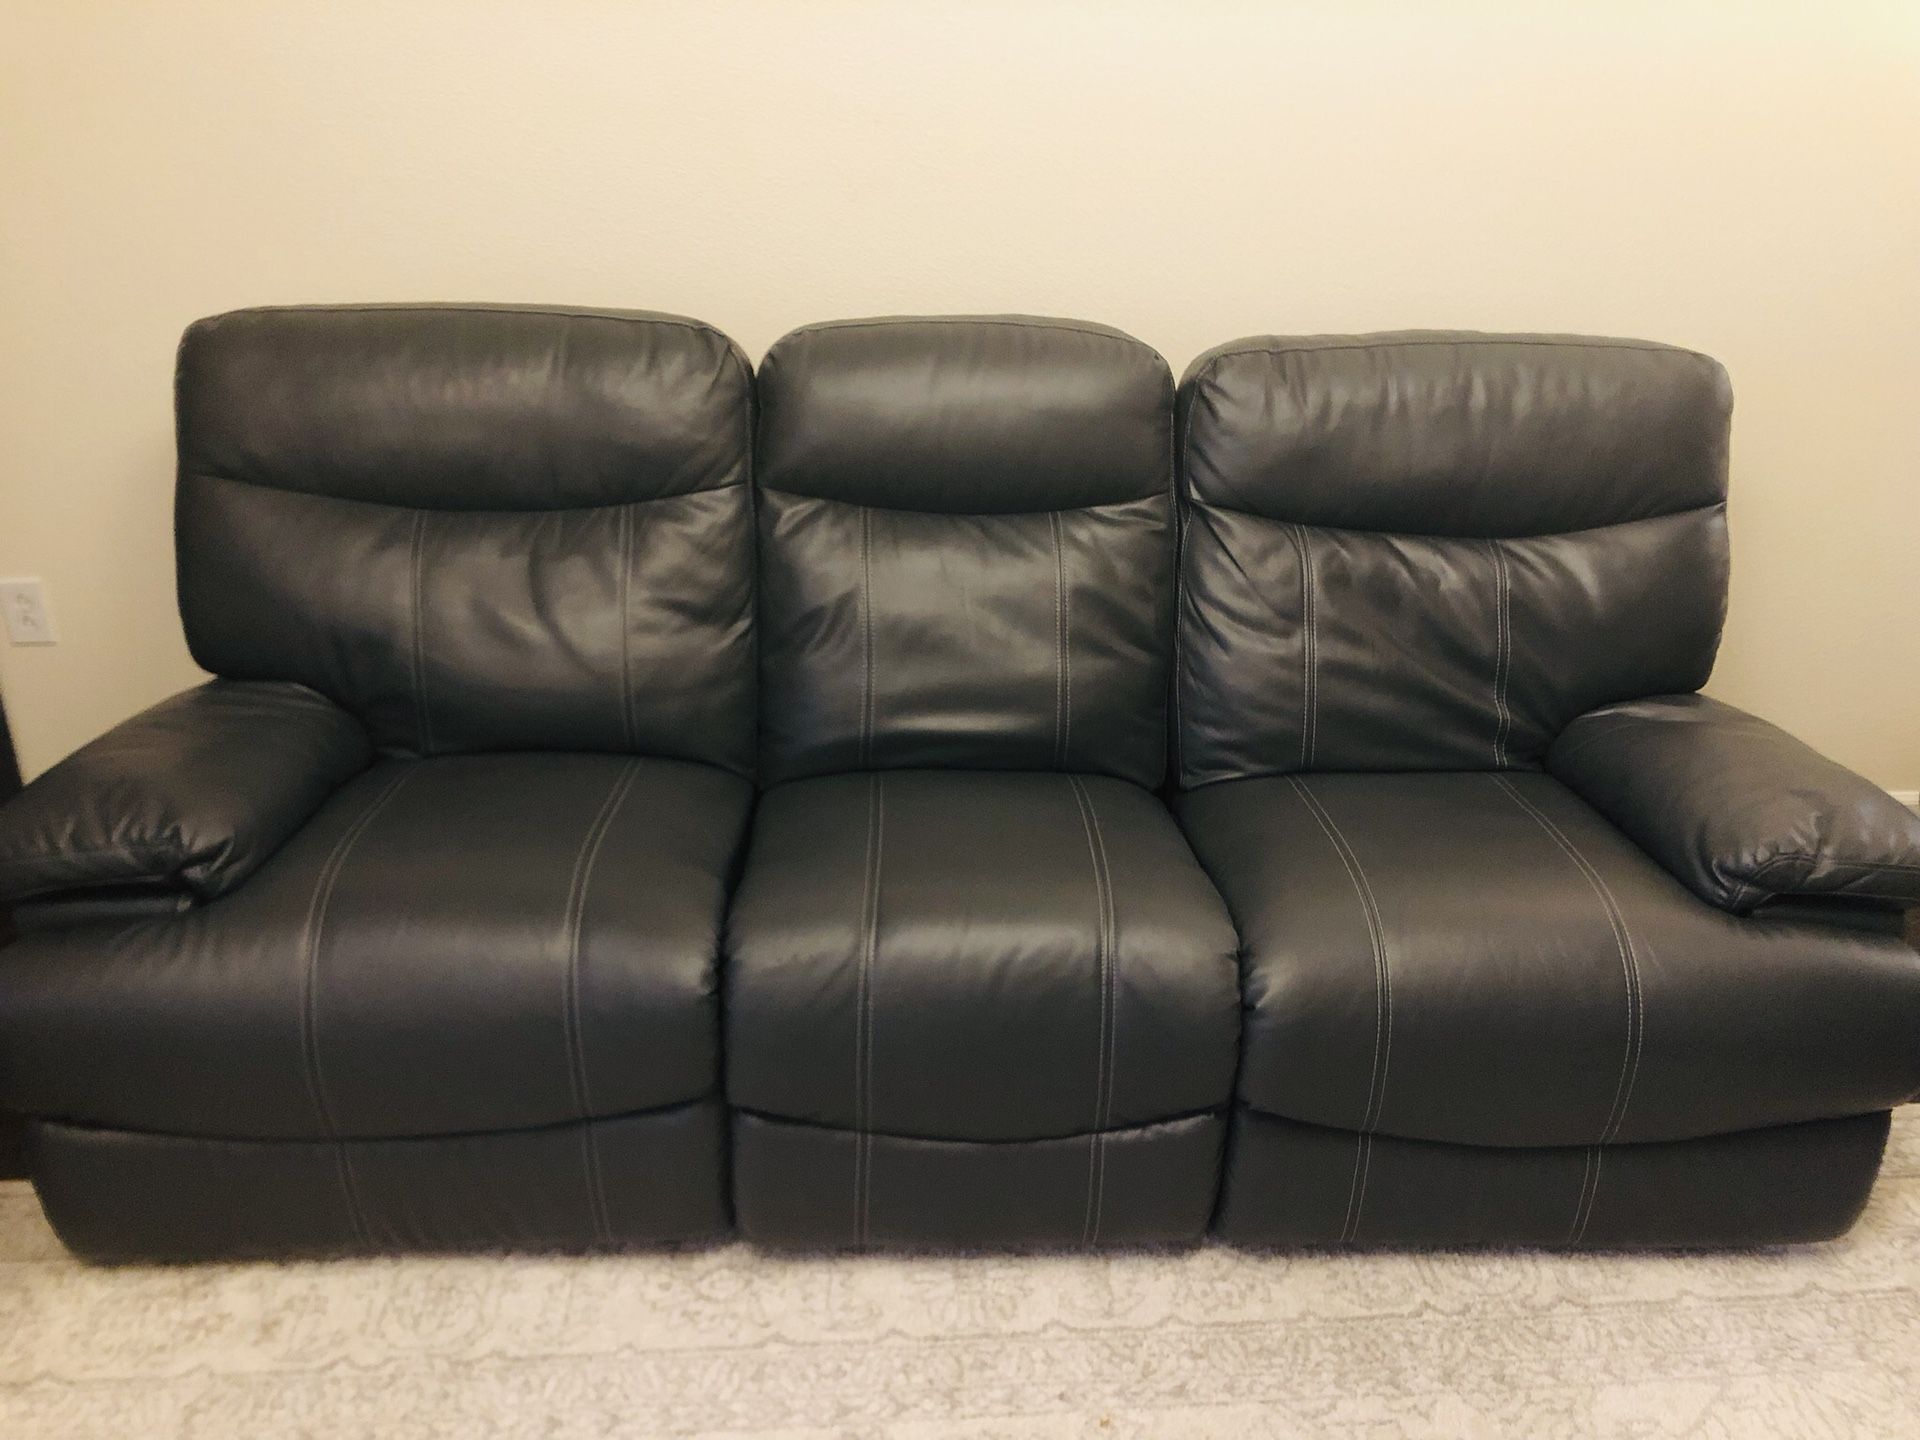 Excellent blue leather 3-seat living room sofa